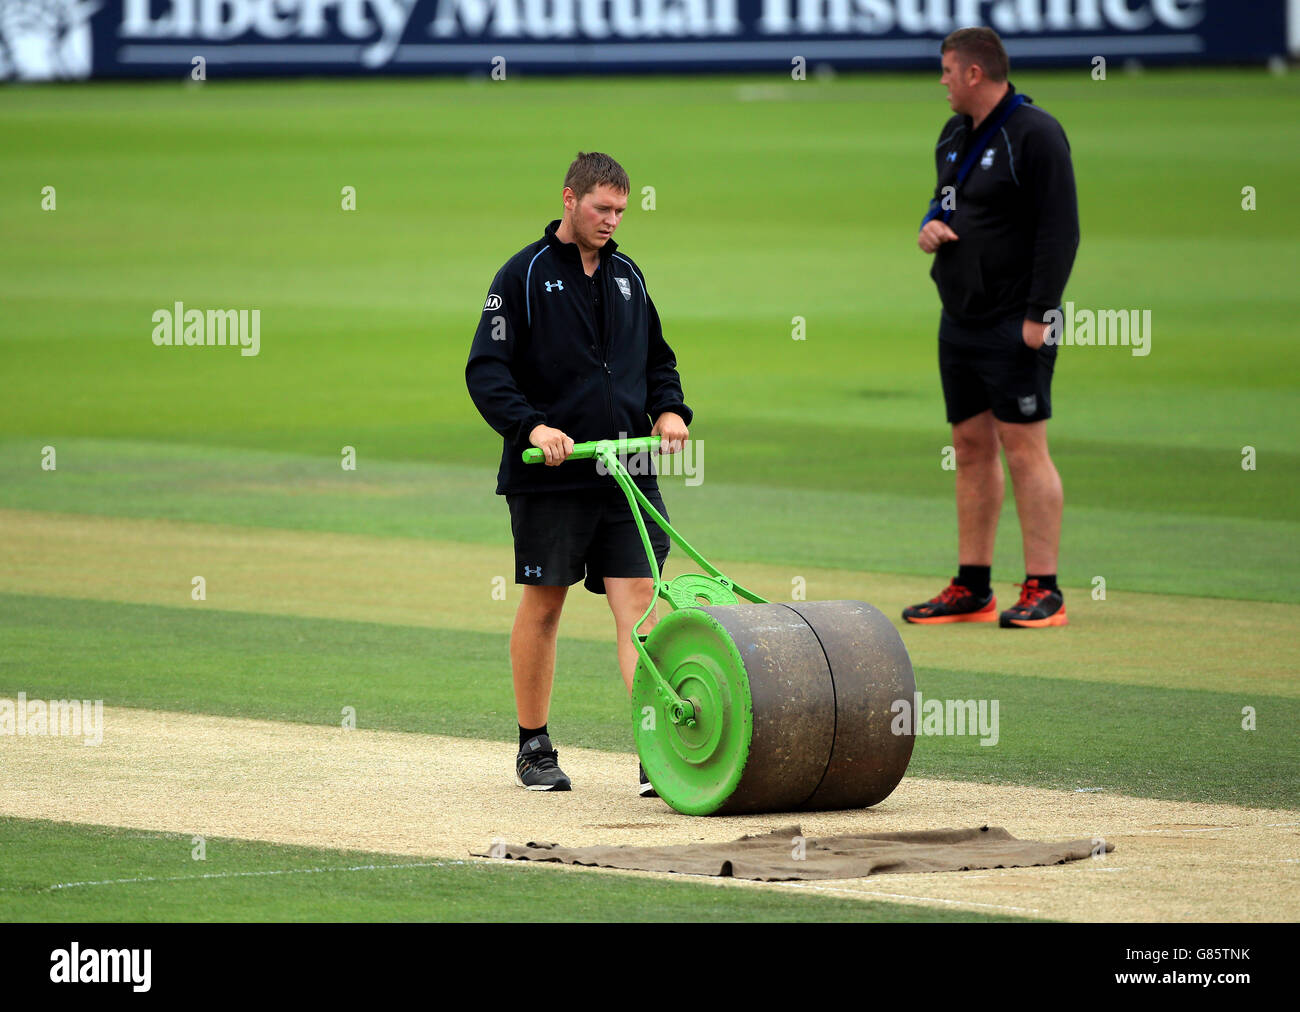 Surrey's ground staff roll the wicket before the match Stock Photo